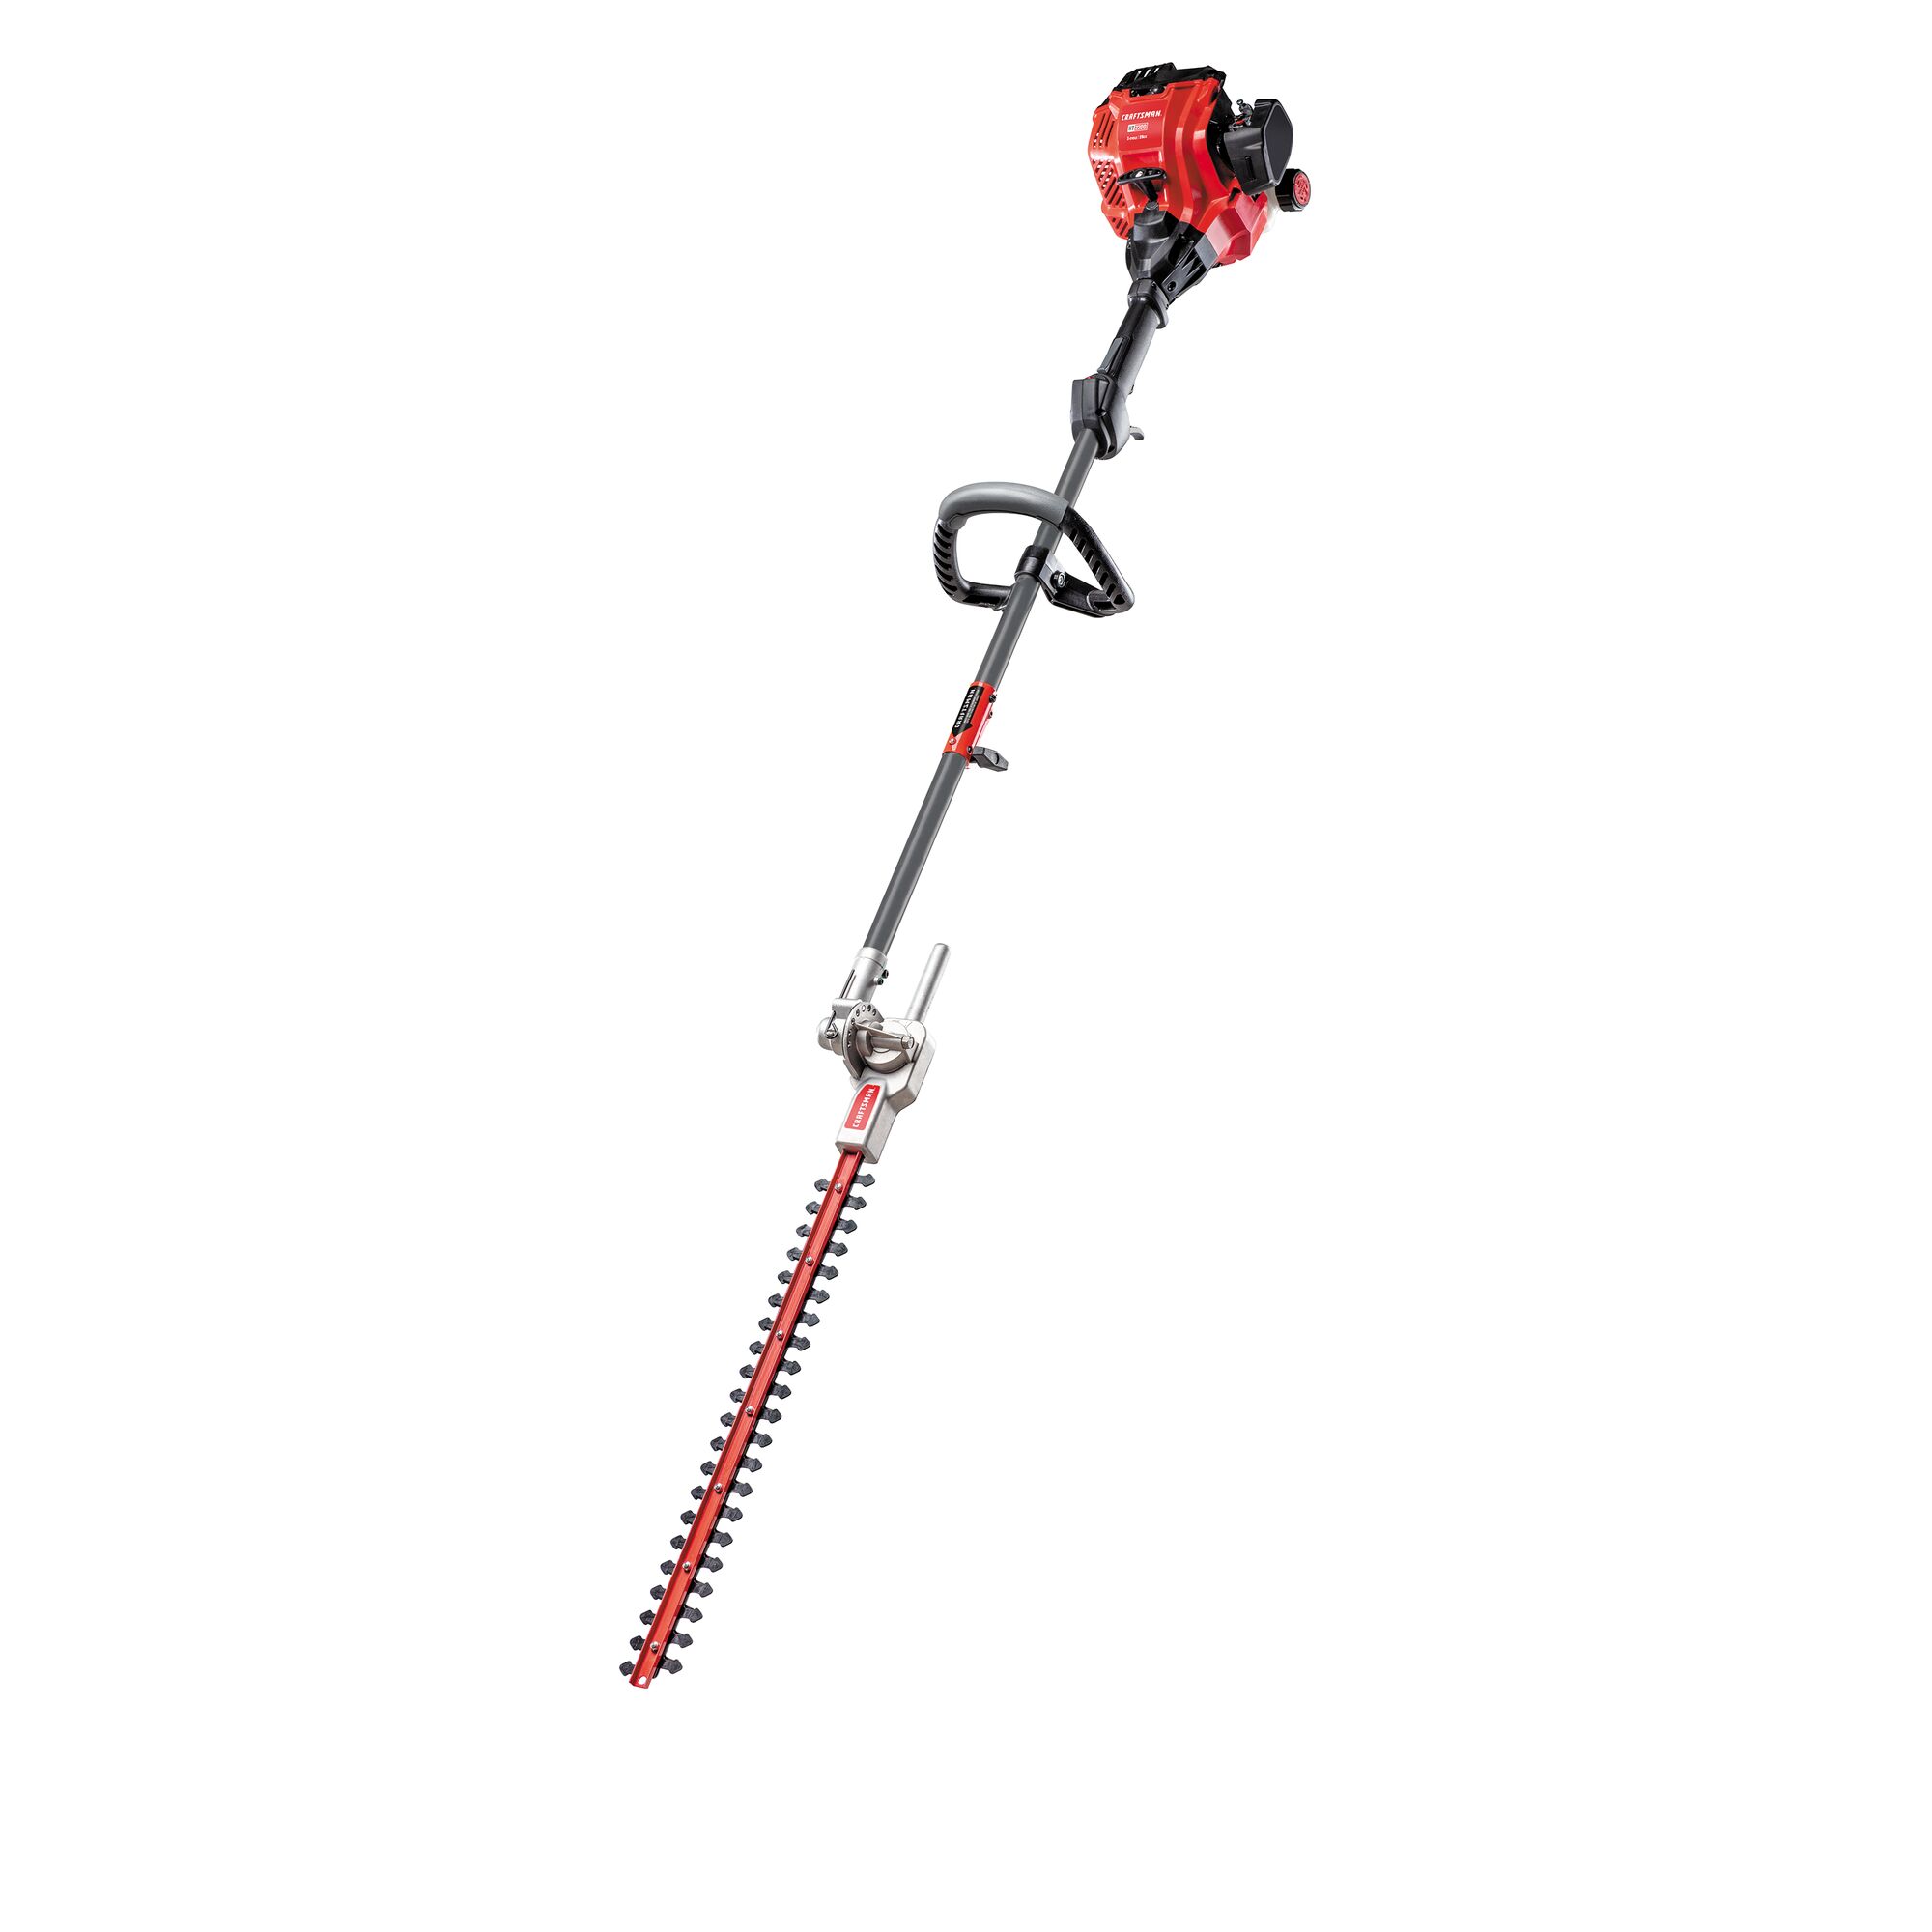 Profile of HT2200 25CC 2 cycle 22 inch attachment capable gas hedge trimmer.